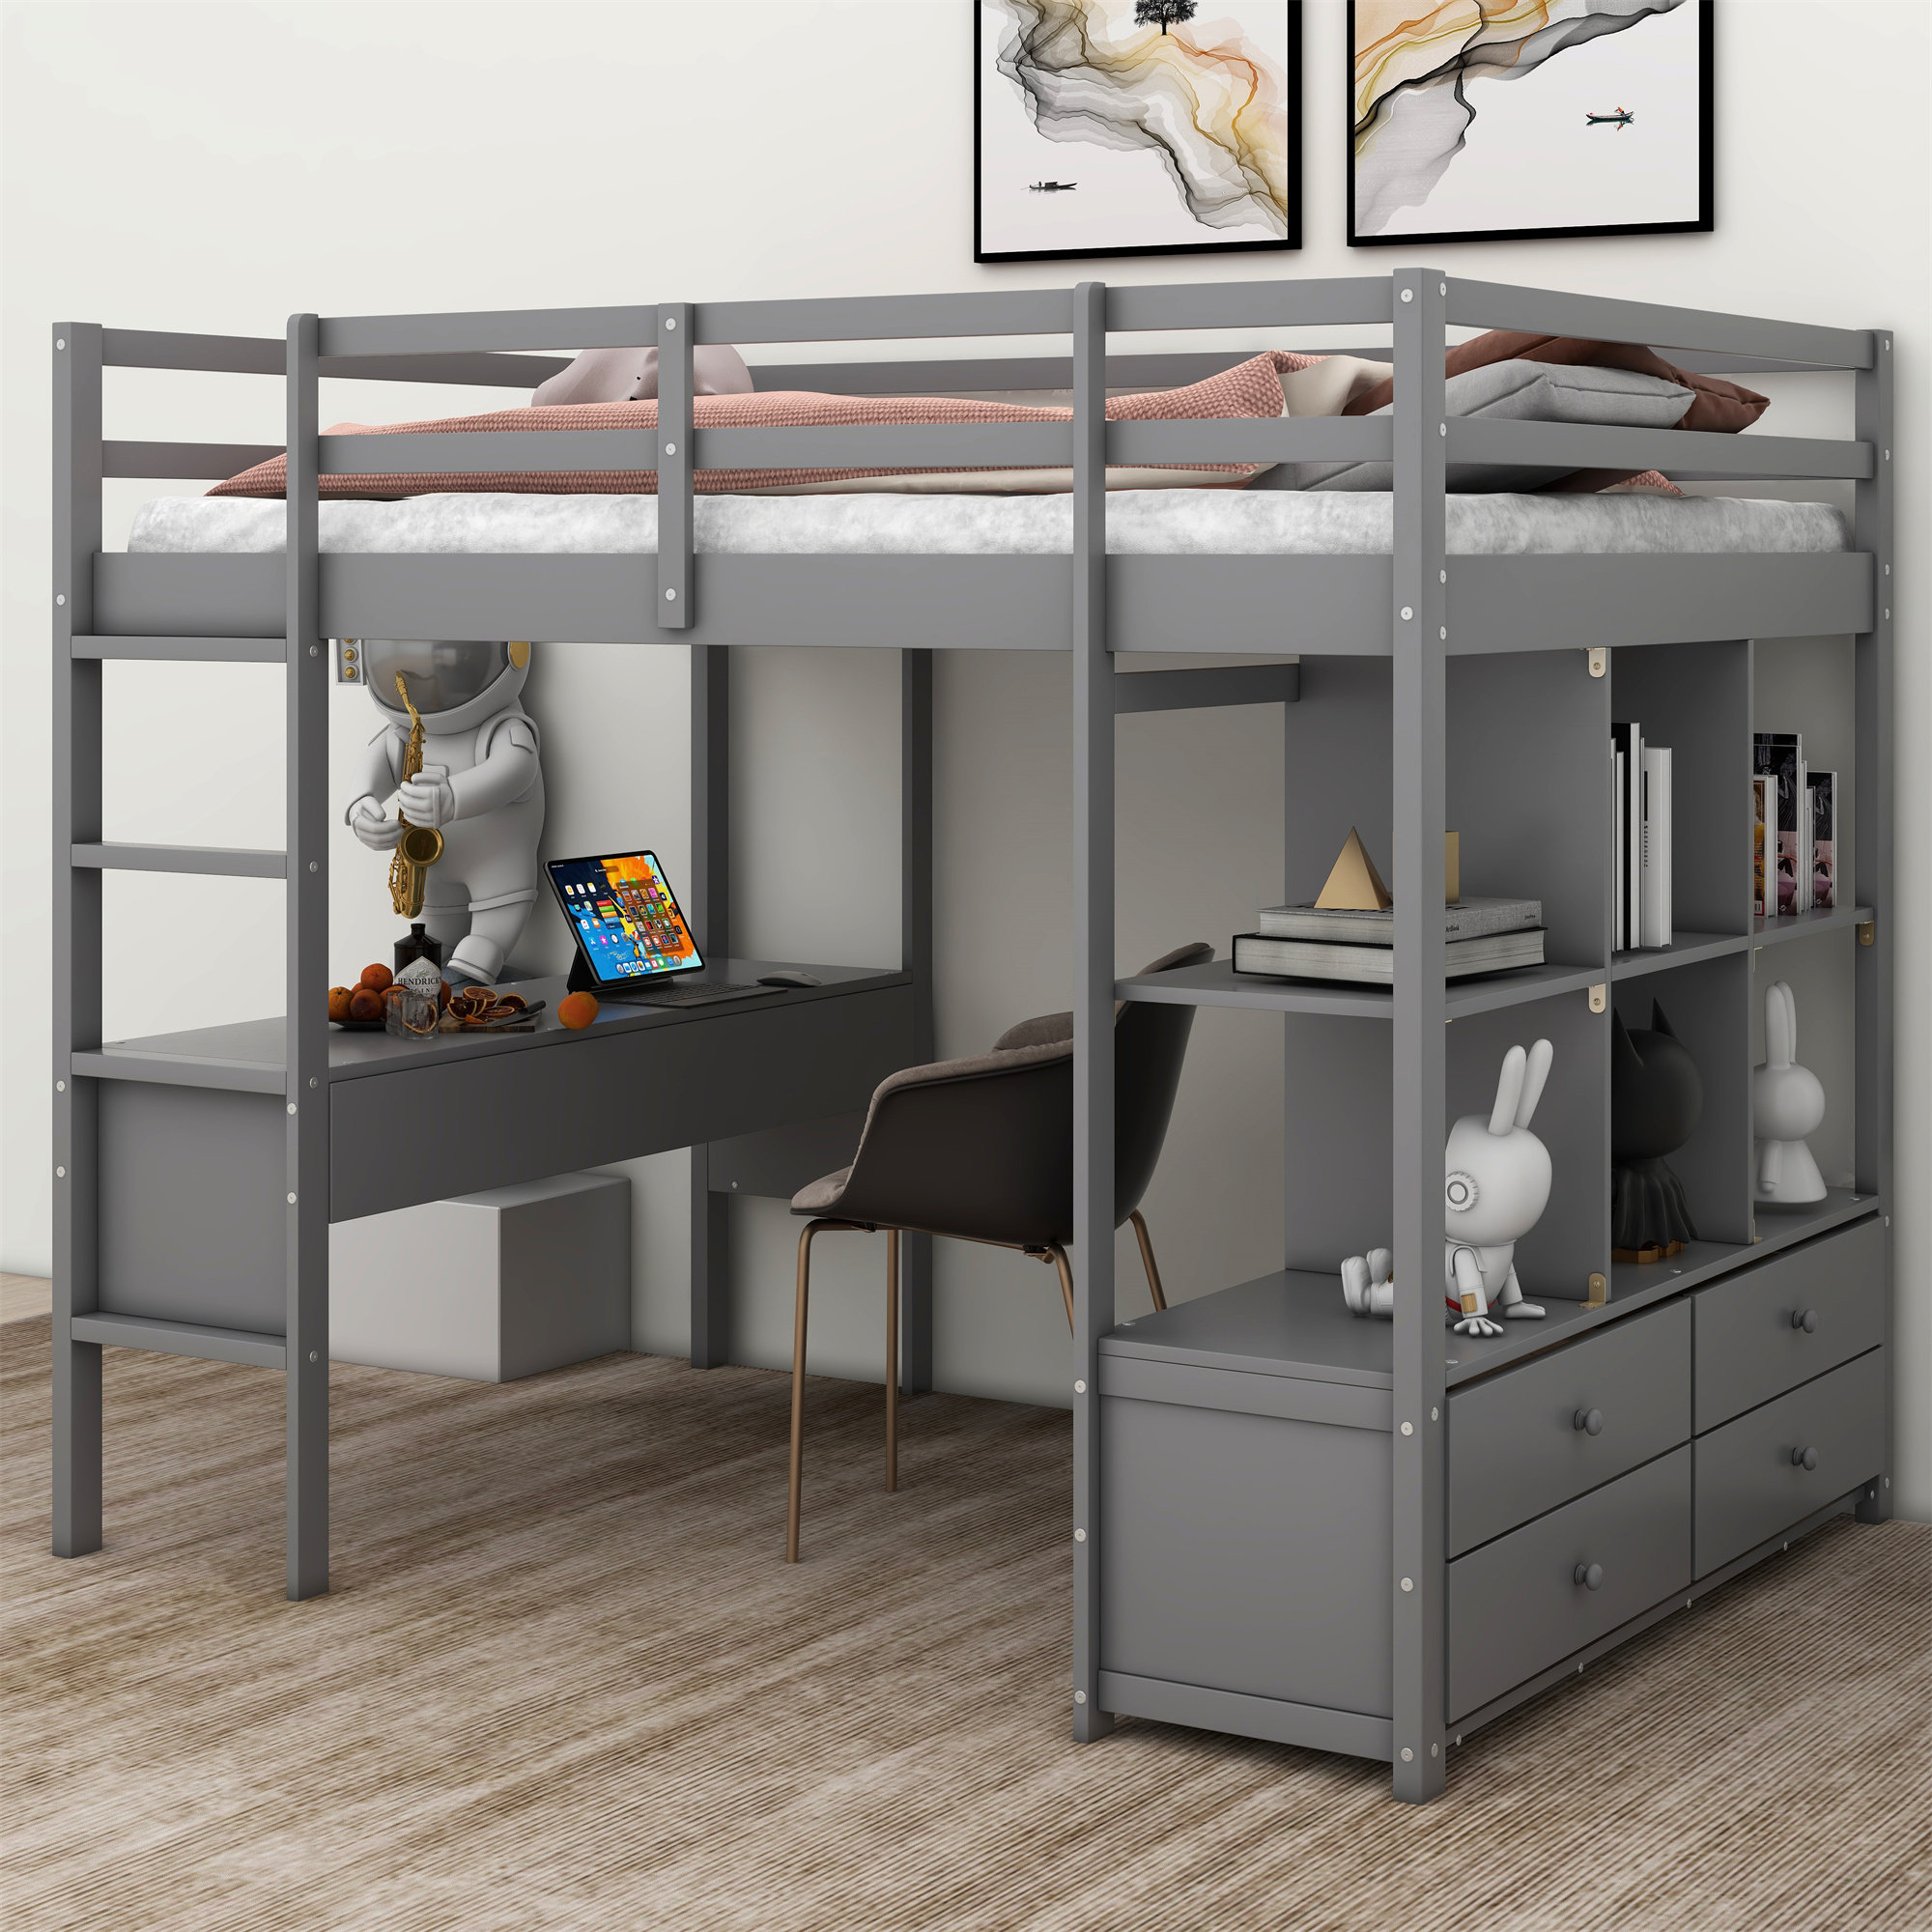 Harriet Bee Jagat Full Size Wooden Loft Bed with Built-in Desk,Drawers ...